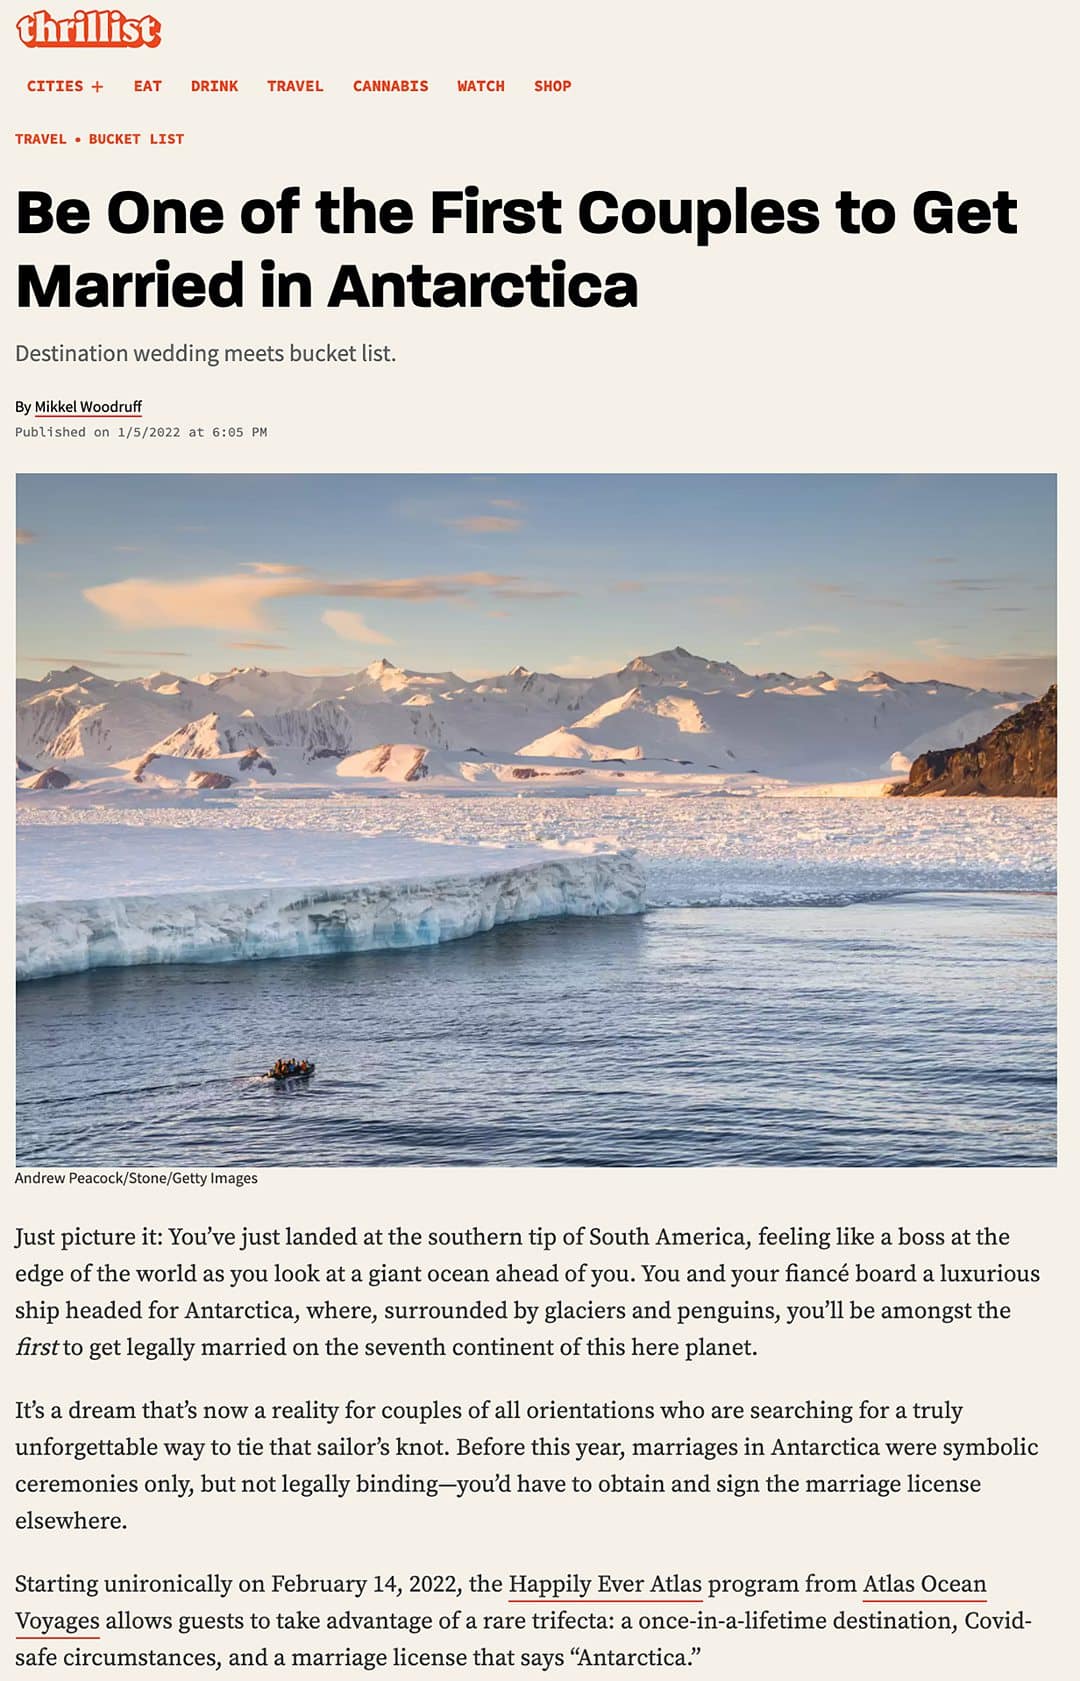 Thrillist article to Be One of the First Couples to Get Married in Antarctica.